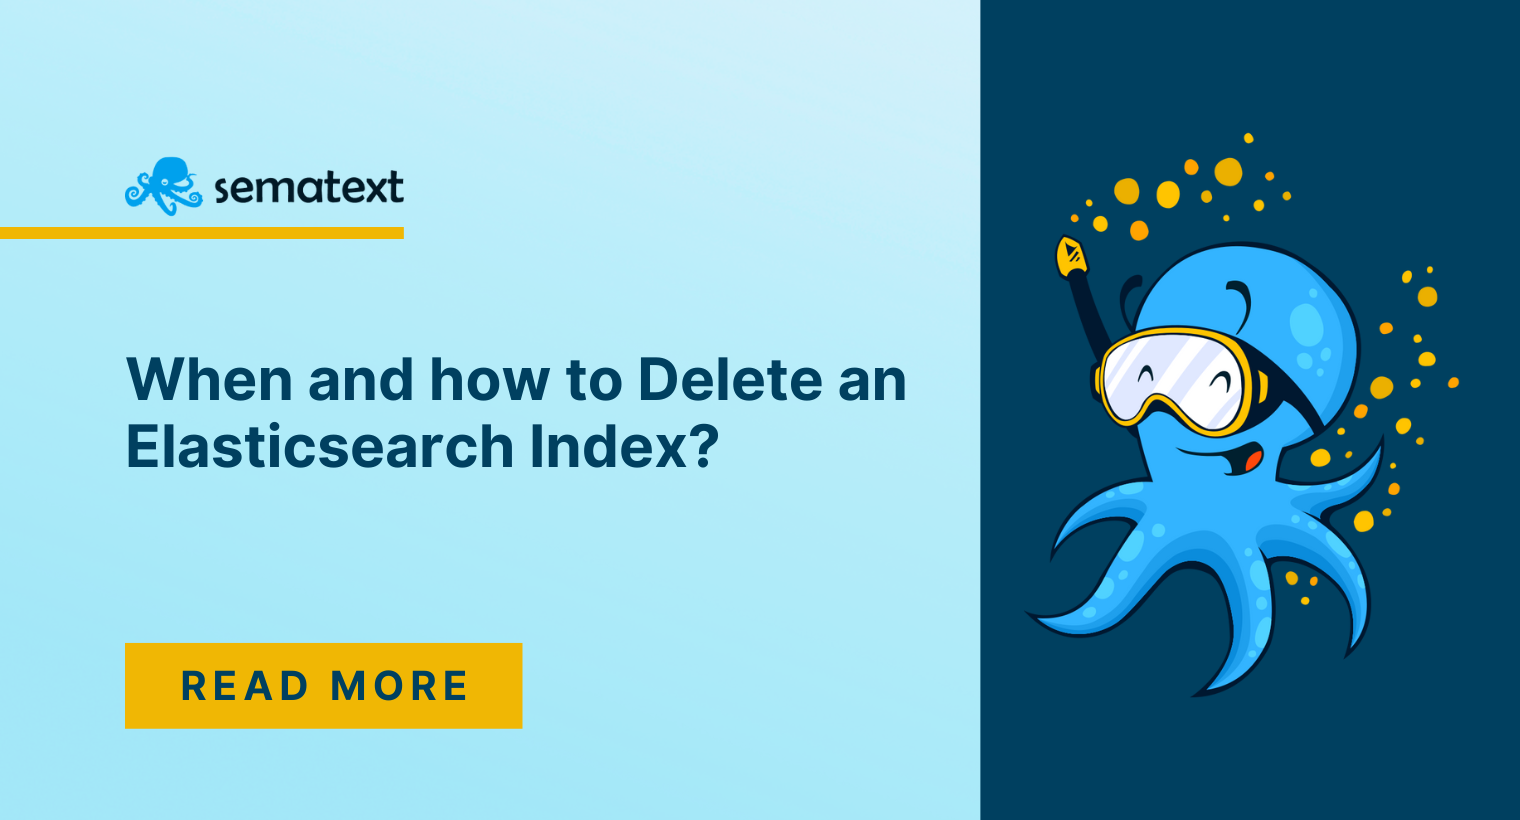 When and how to Delete an Elasticsearch Index?